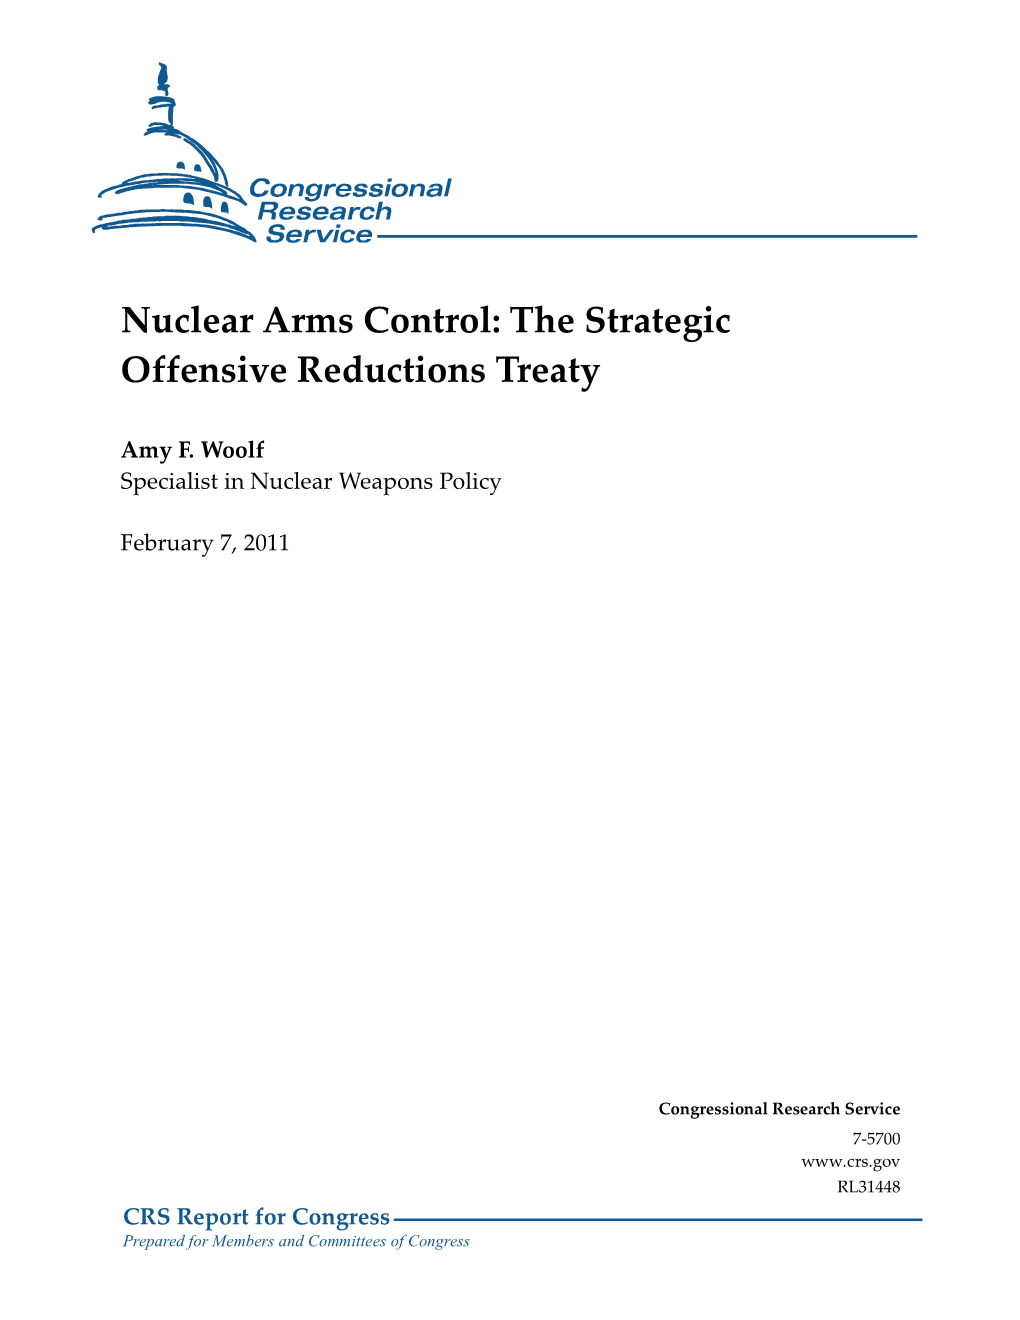 Nuclear Arms Control: the Strategic Offensive Reductions Treaty